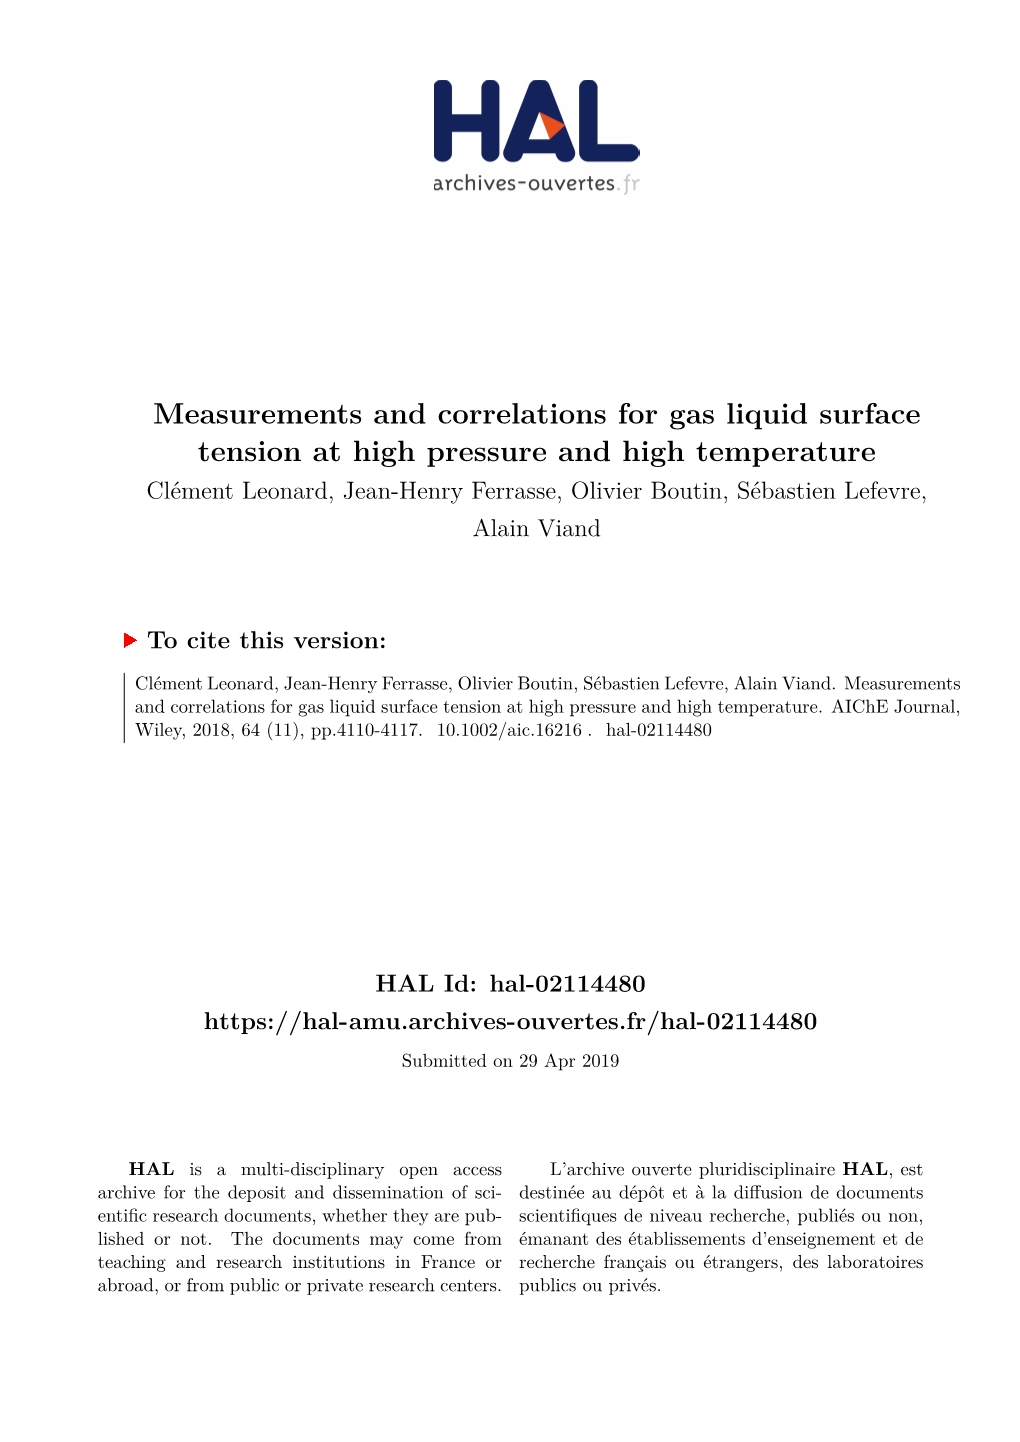 Measurements and Correlations for Gas Liquid Surface Tension at High